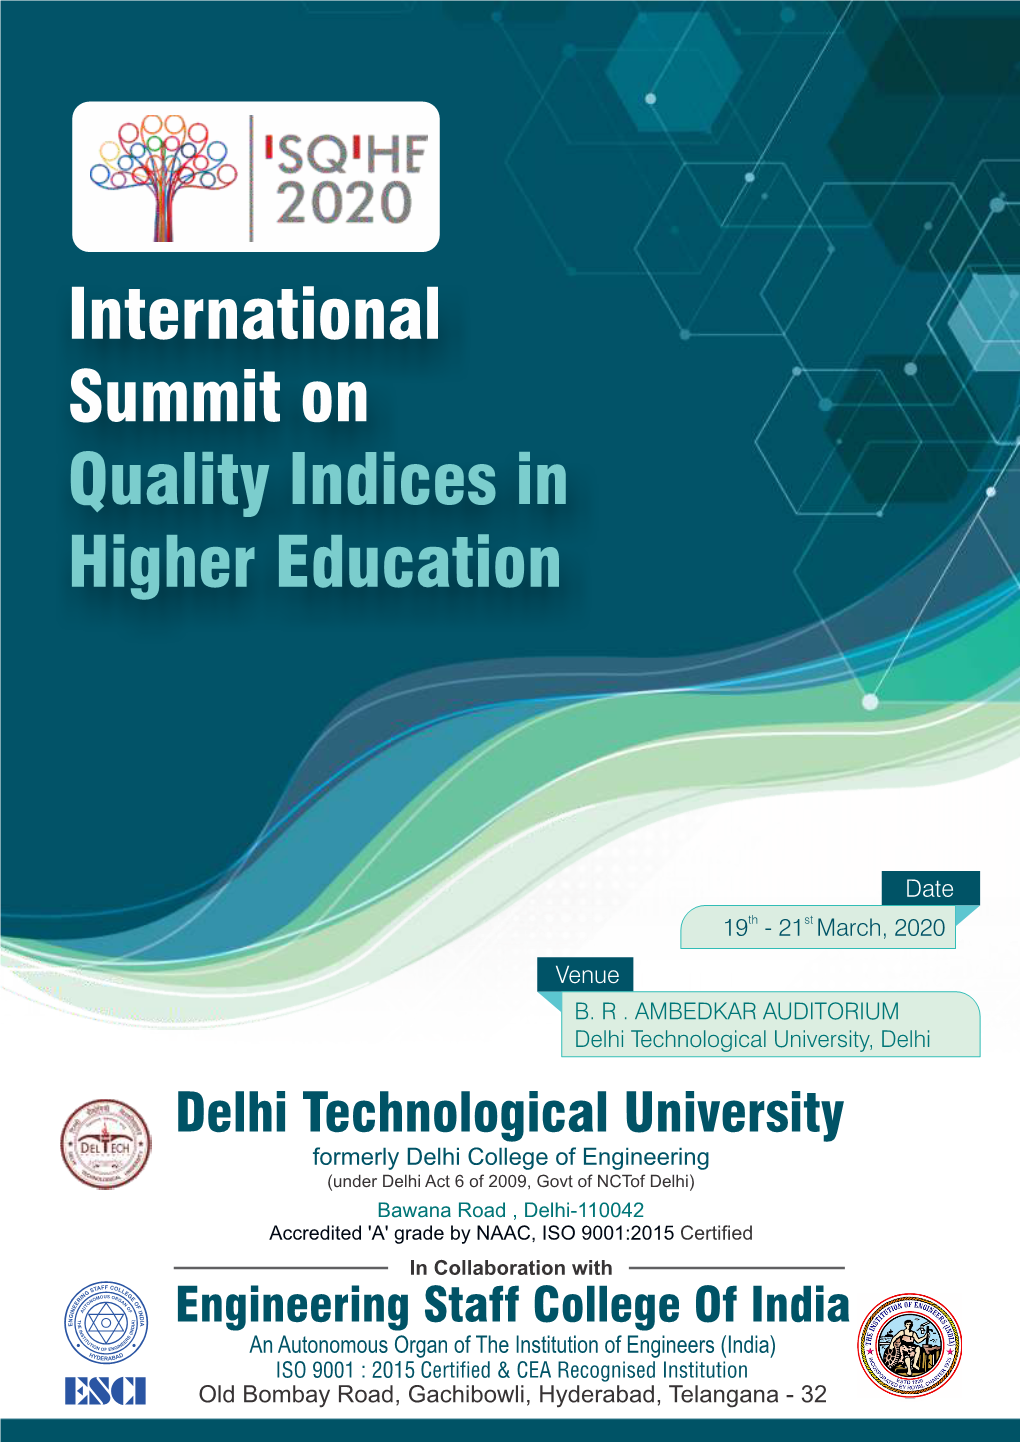 International Summit on Quality Indices in Higher Education